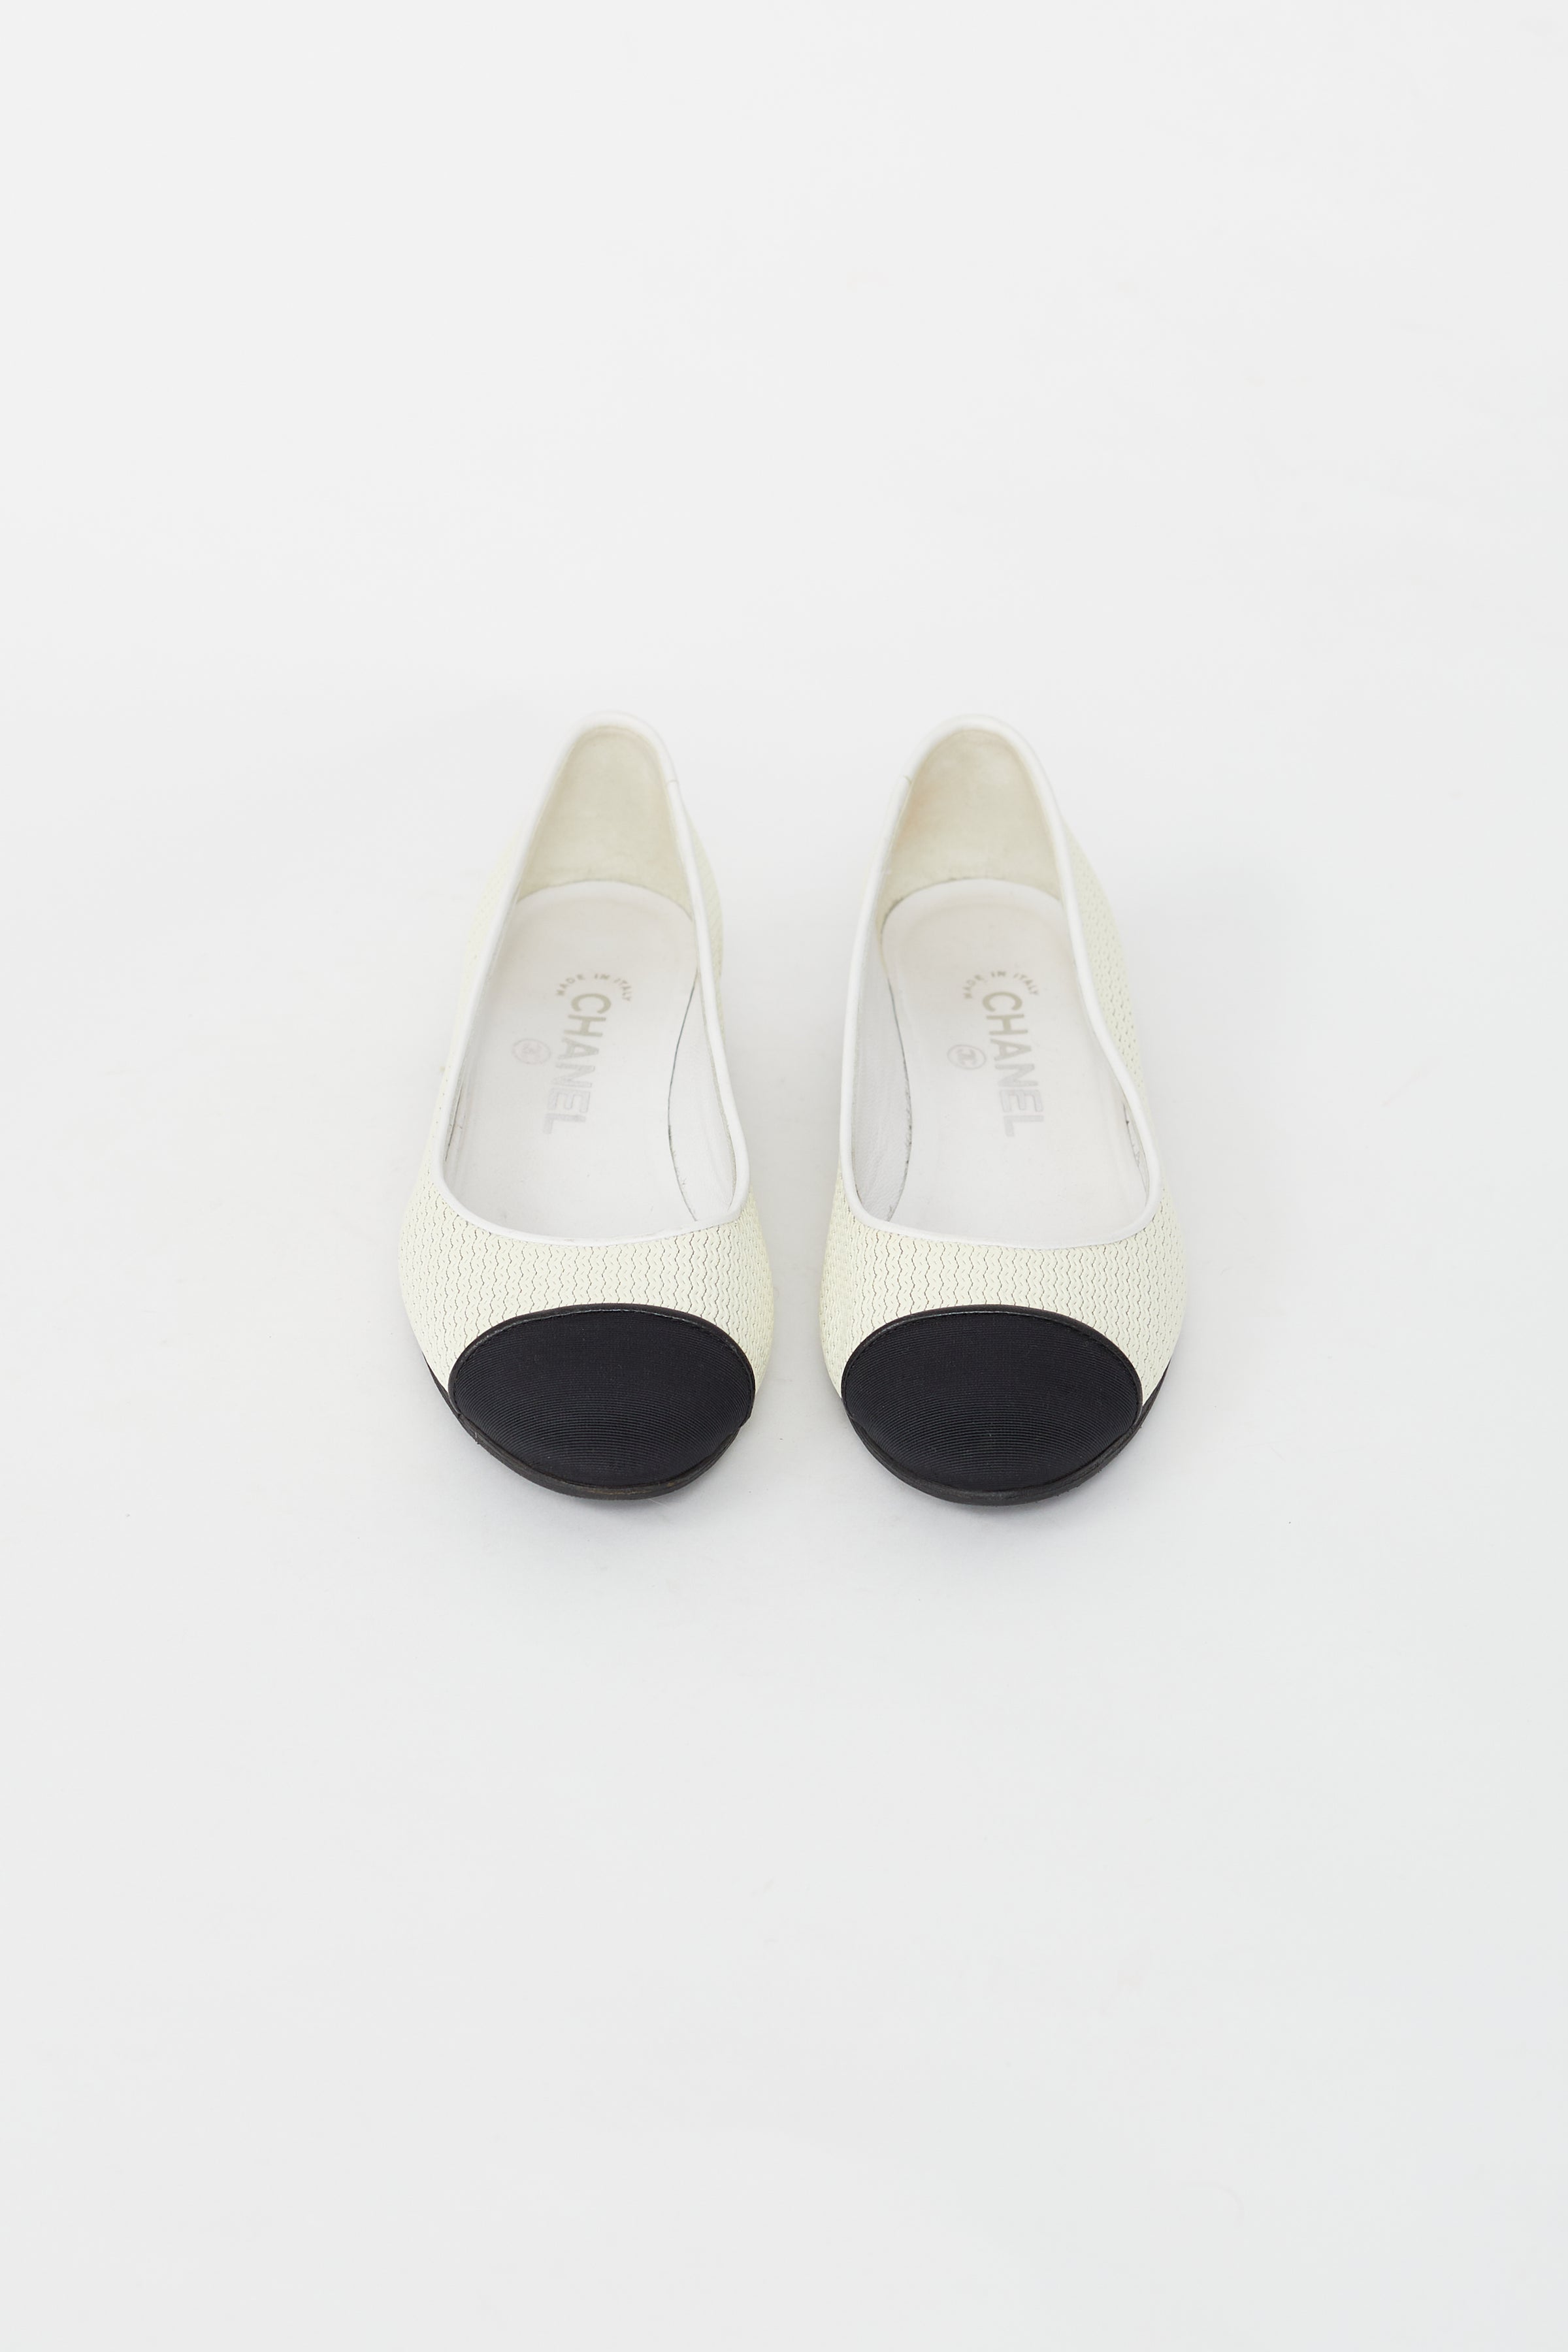 Chanel Women's Ballet flats  Buy or Sell Designer shoes - Vestiaire  Collective